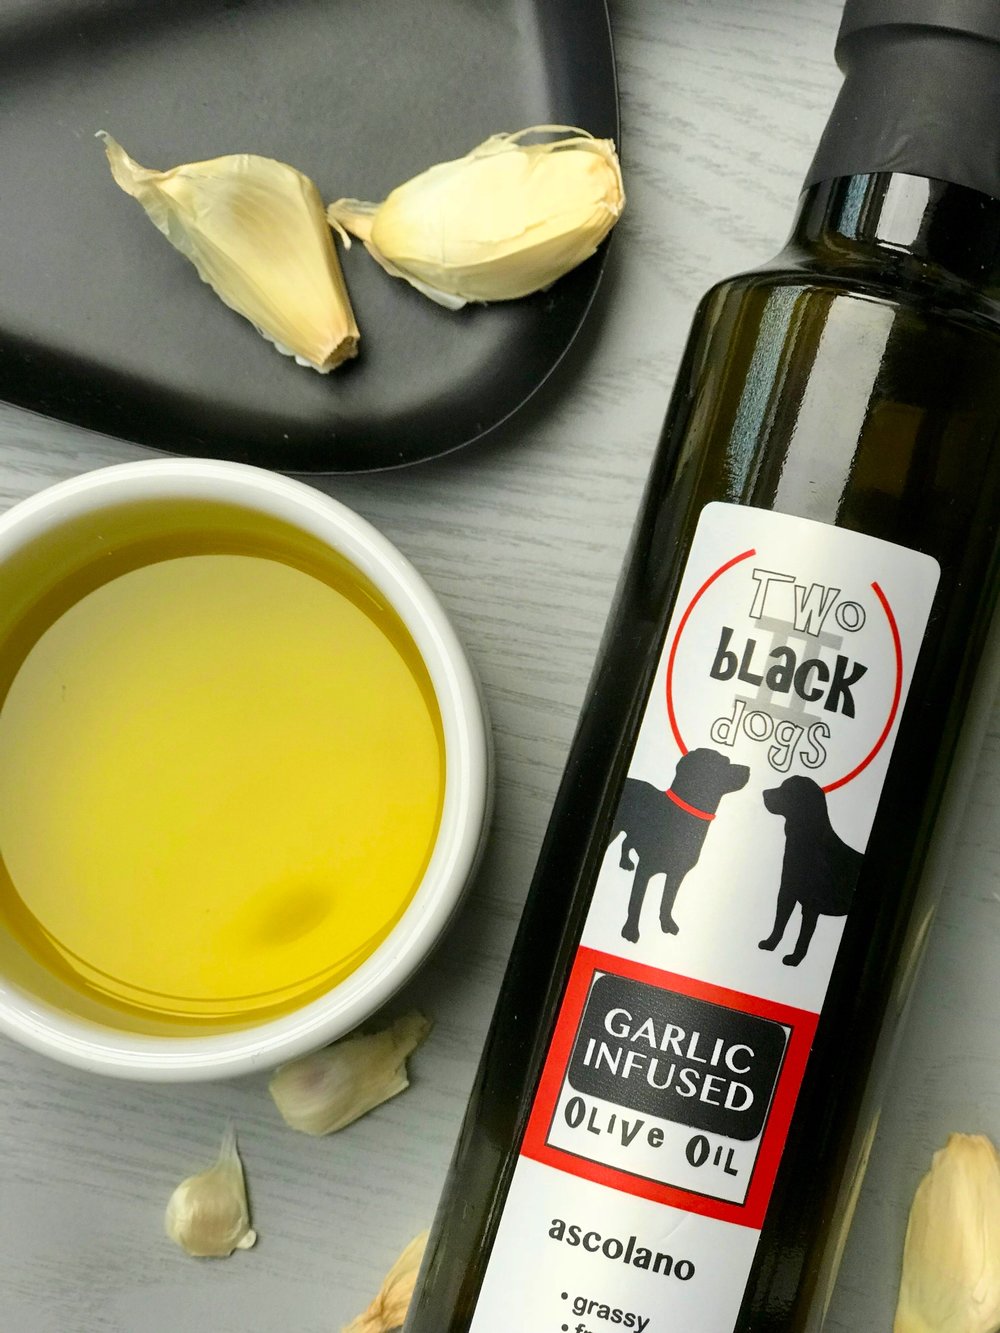 Two black dogs olive oil 2 p.jpeg